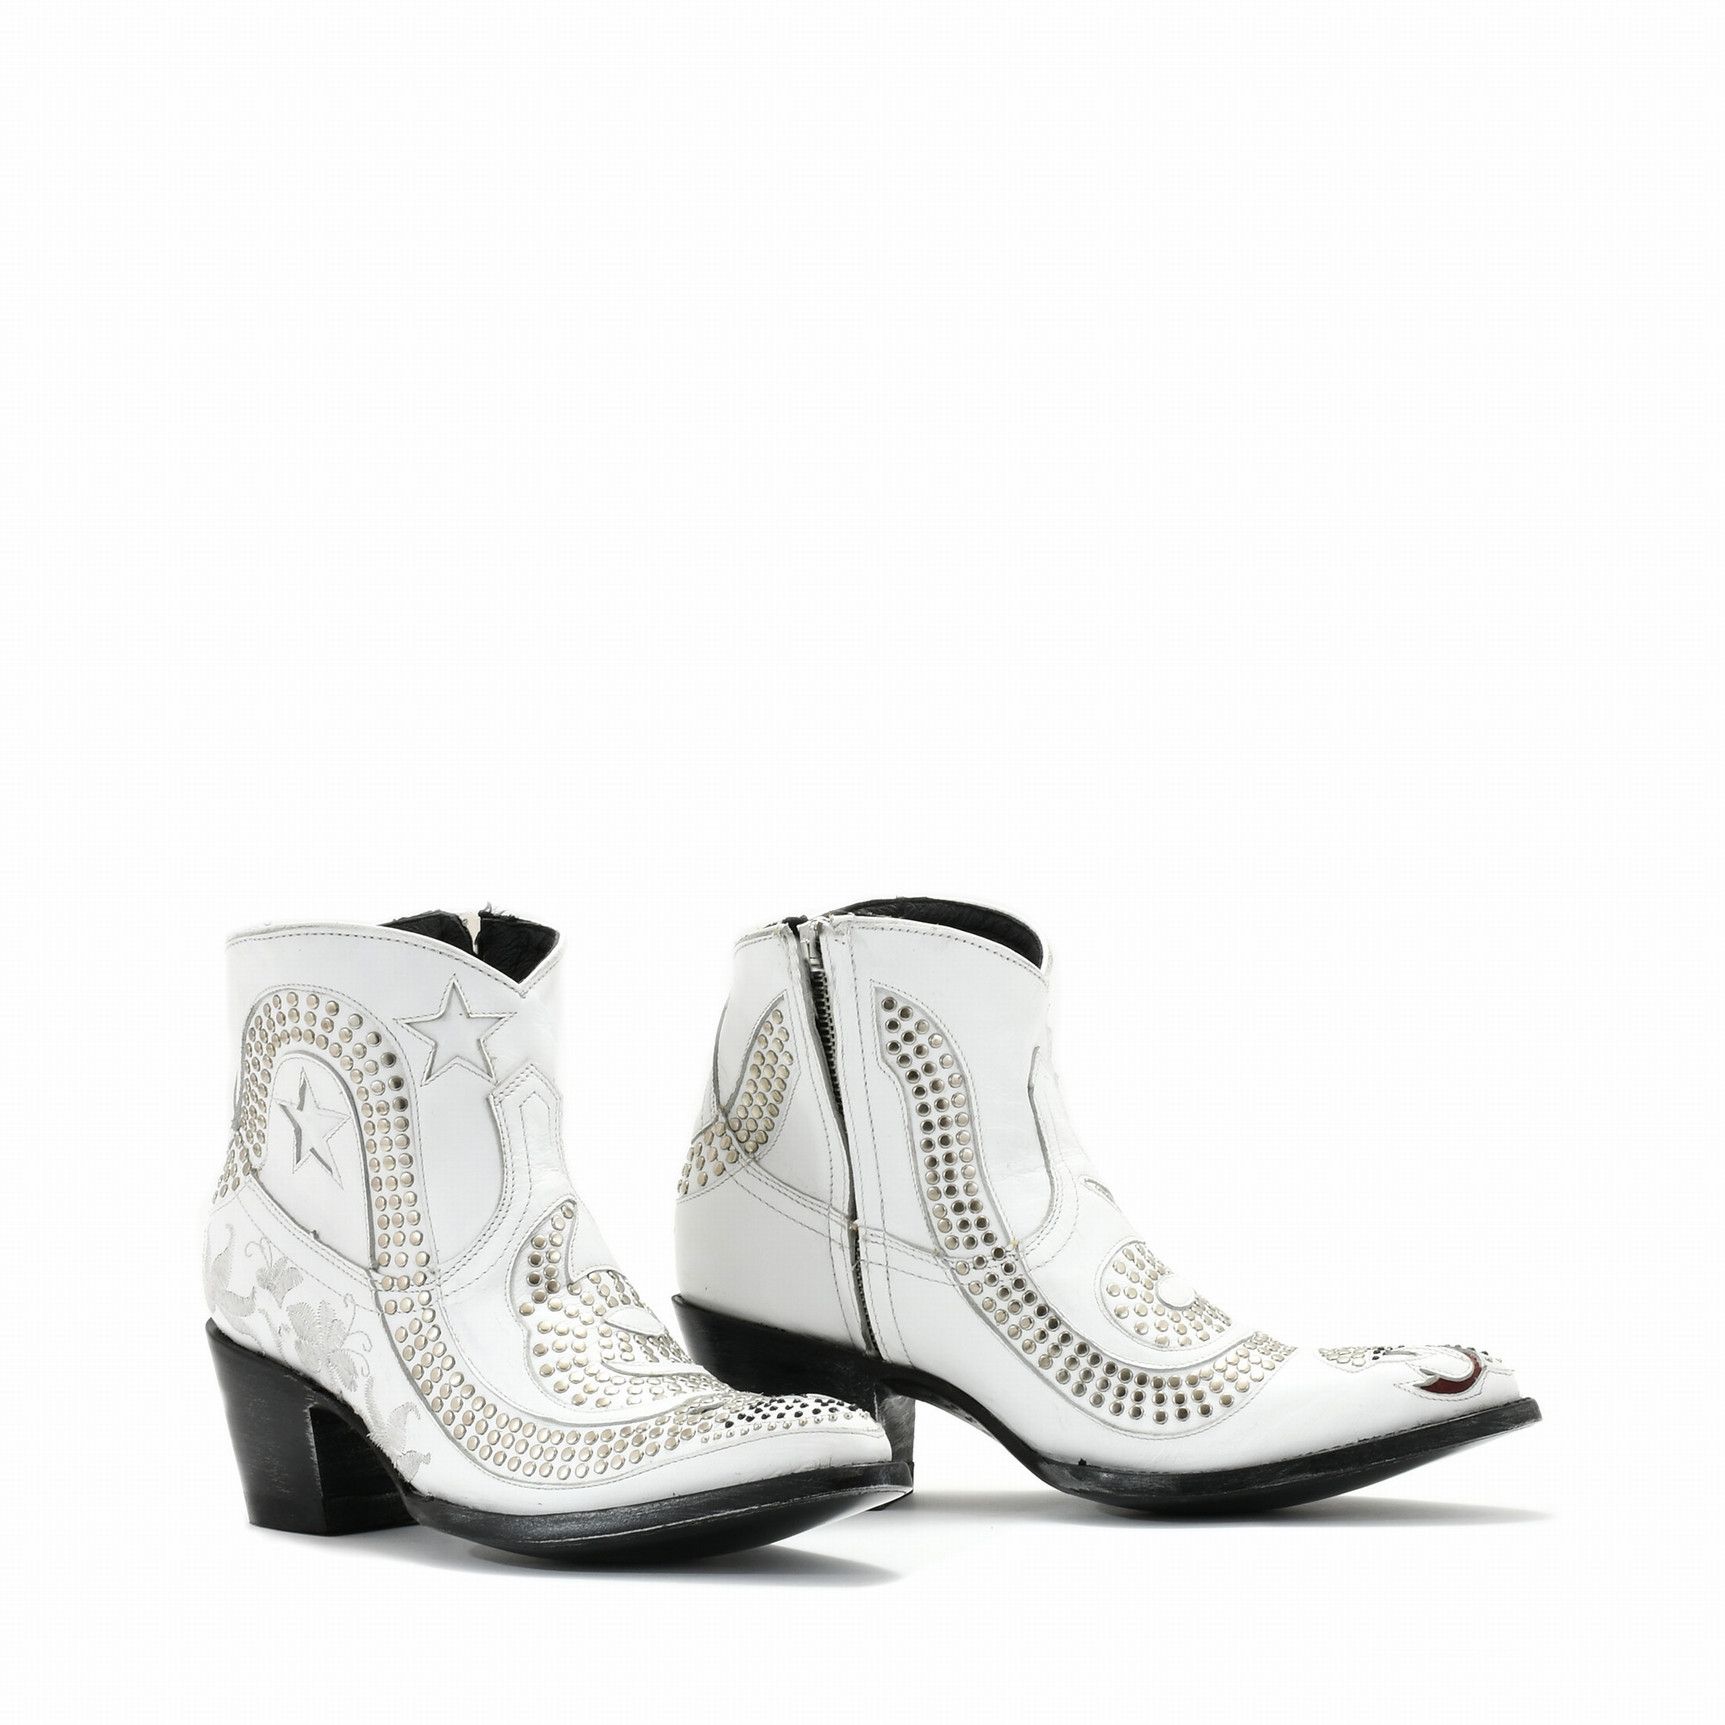 CORIUS SNAKE 6 WHITE POINTED TOE ANKLE BOOTS WITH STUDS  AND SNAKE OUTCUTS   Total heel height 2.6 Inches  100% cow leather  Col